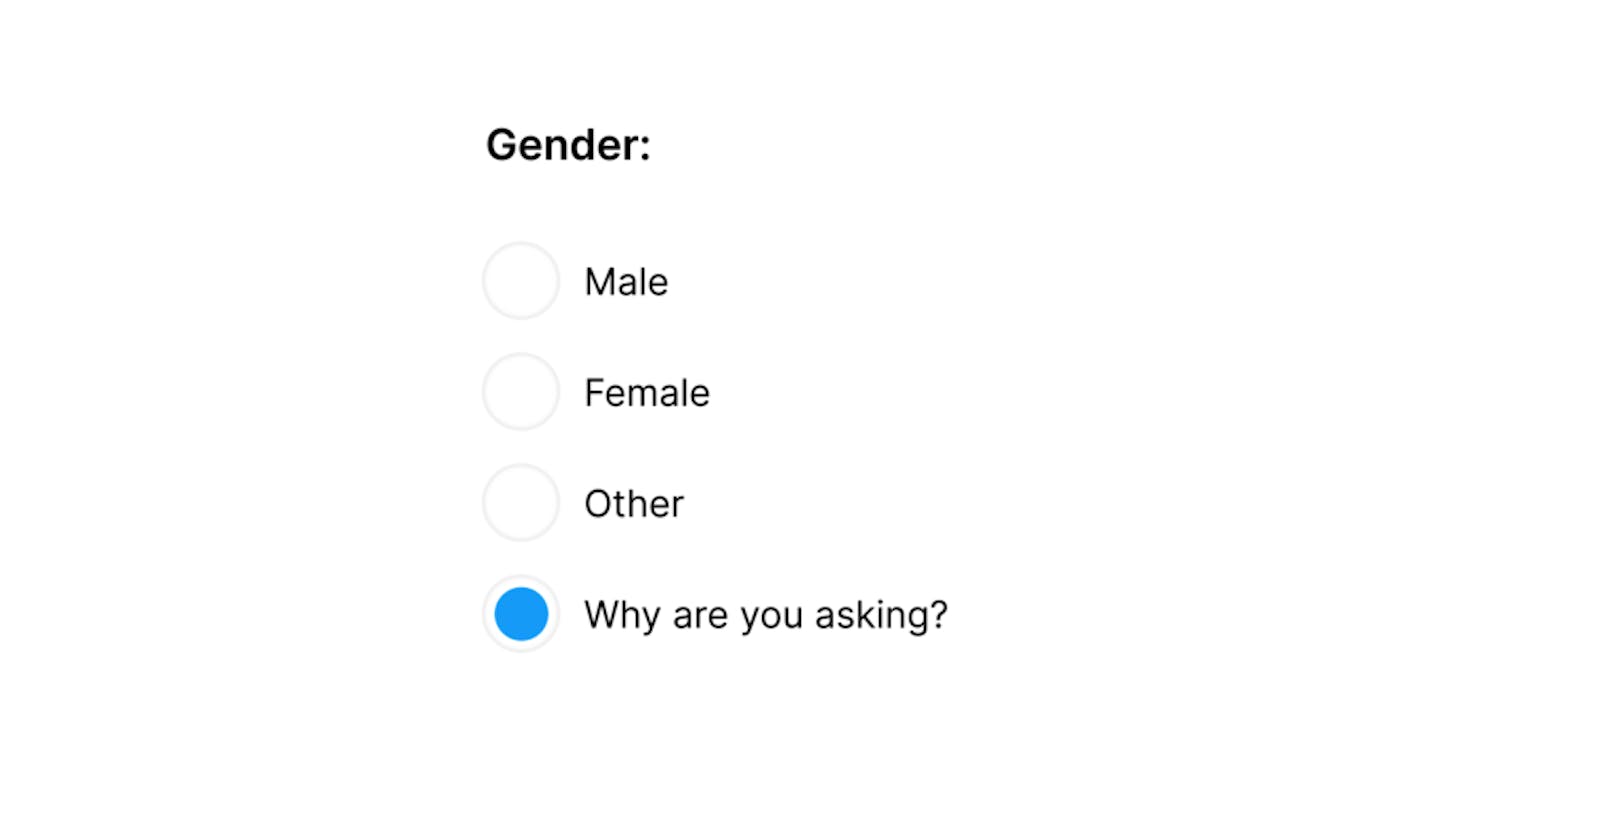 Gender inclusivity is more than an “Other” option